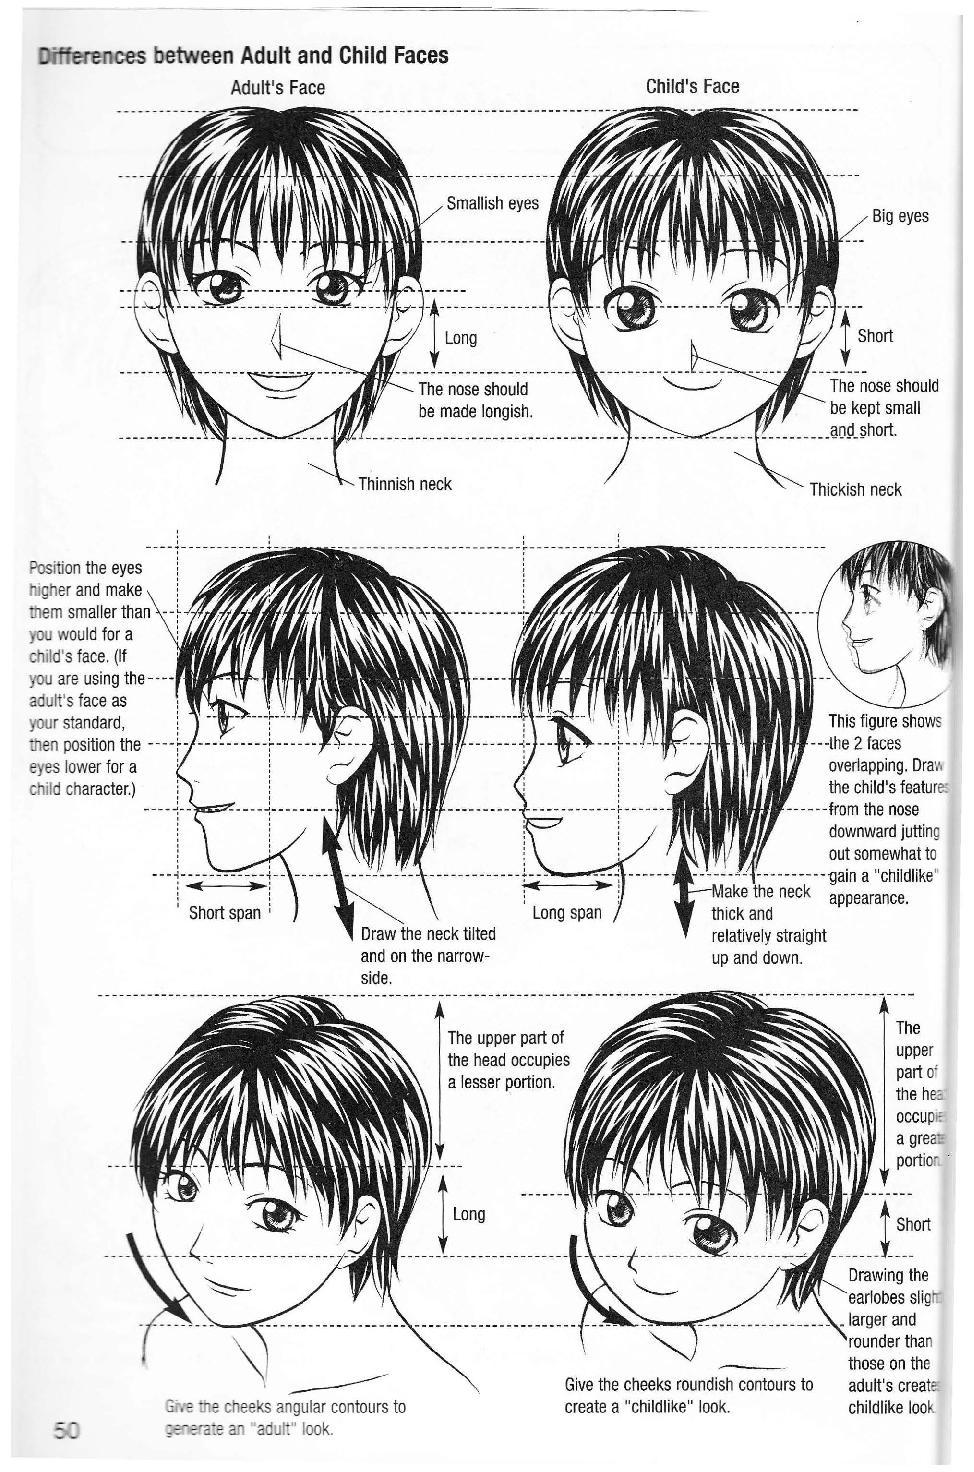 More How to Draw Manga Vol. 2 - Penning Characters 51